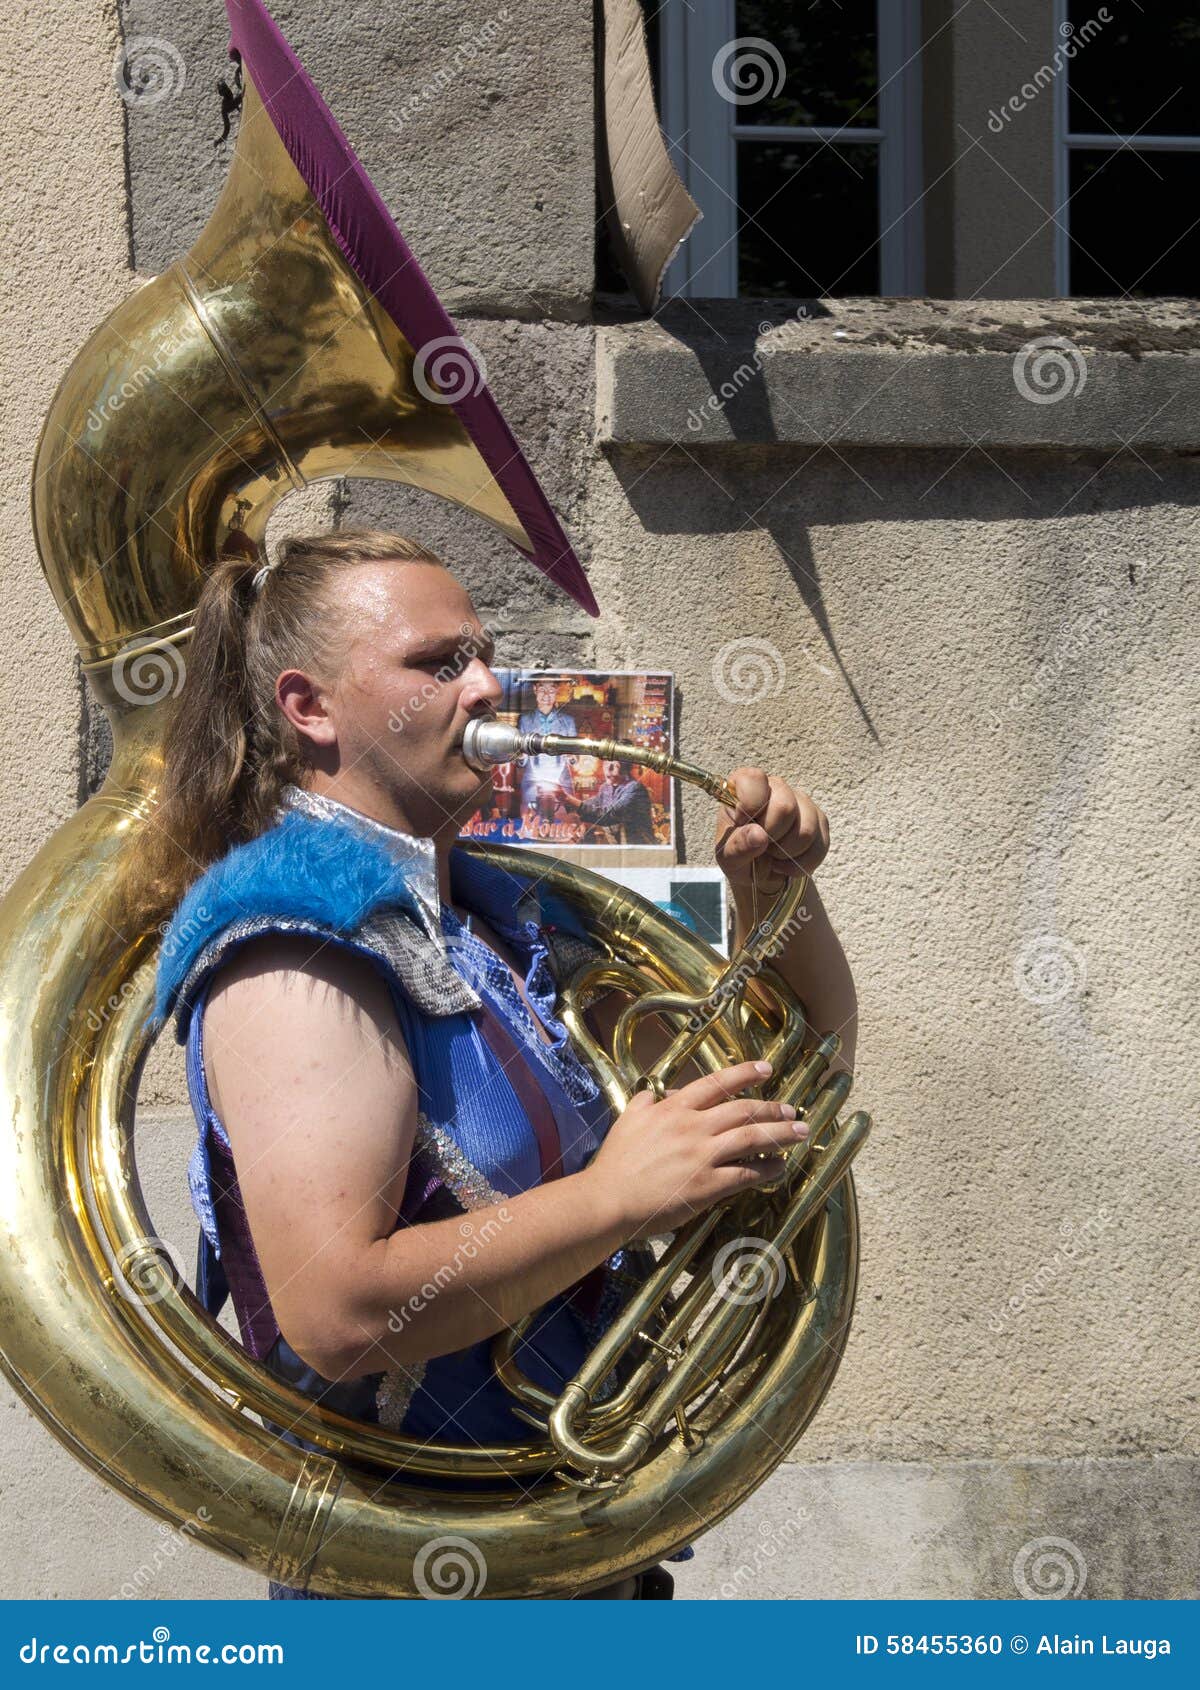 https://thumbs.dreamstime.com/z/man-playing-tuba-street-aurillac-france-august-as-part-aurillac-international-theater-festival-august-58455360.jpg